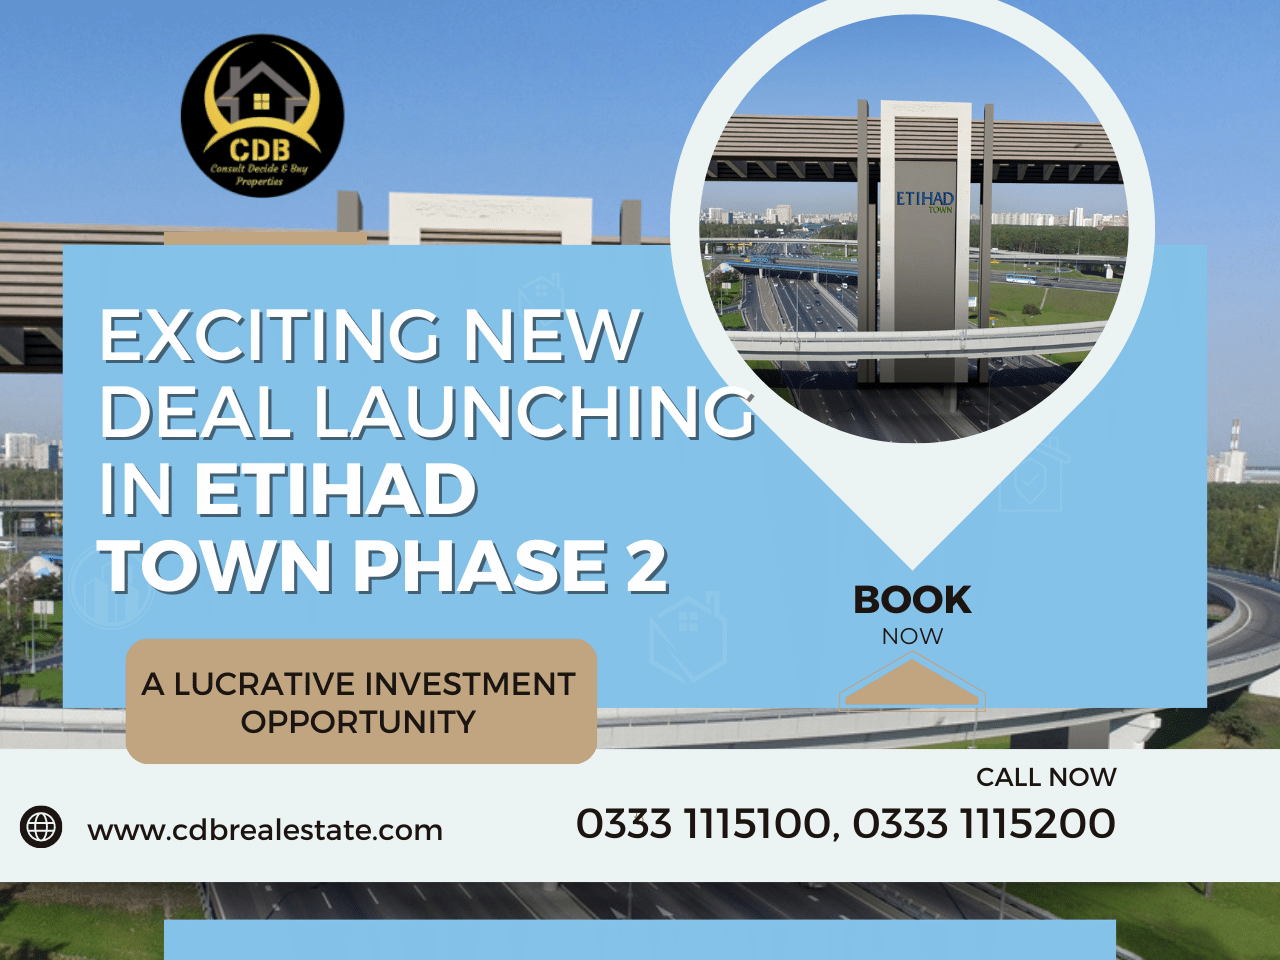 Etihad Town Phase 2 New Deal Launch